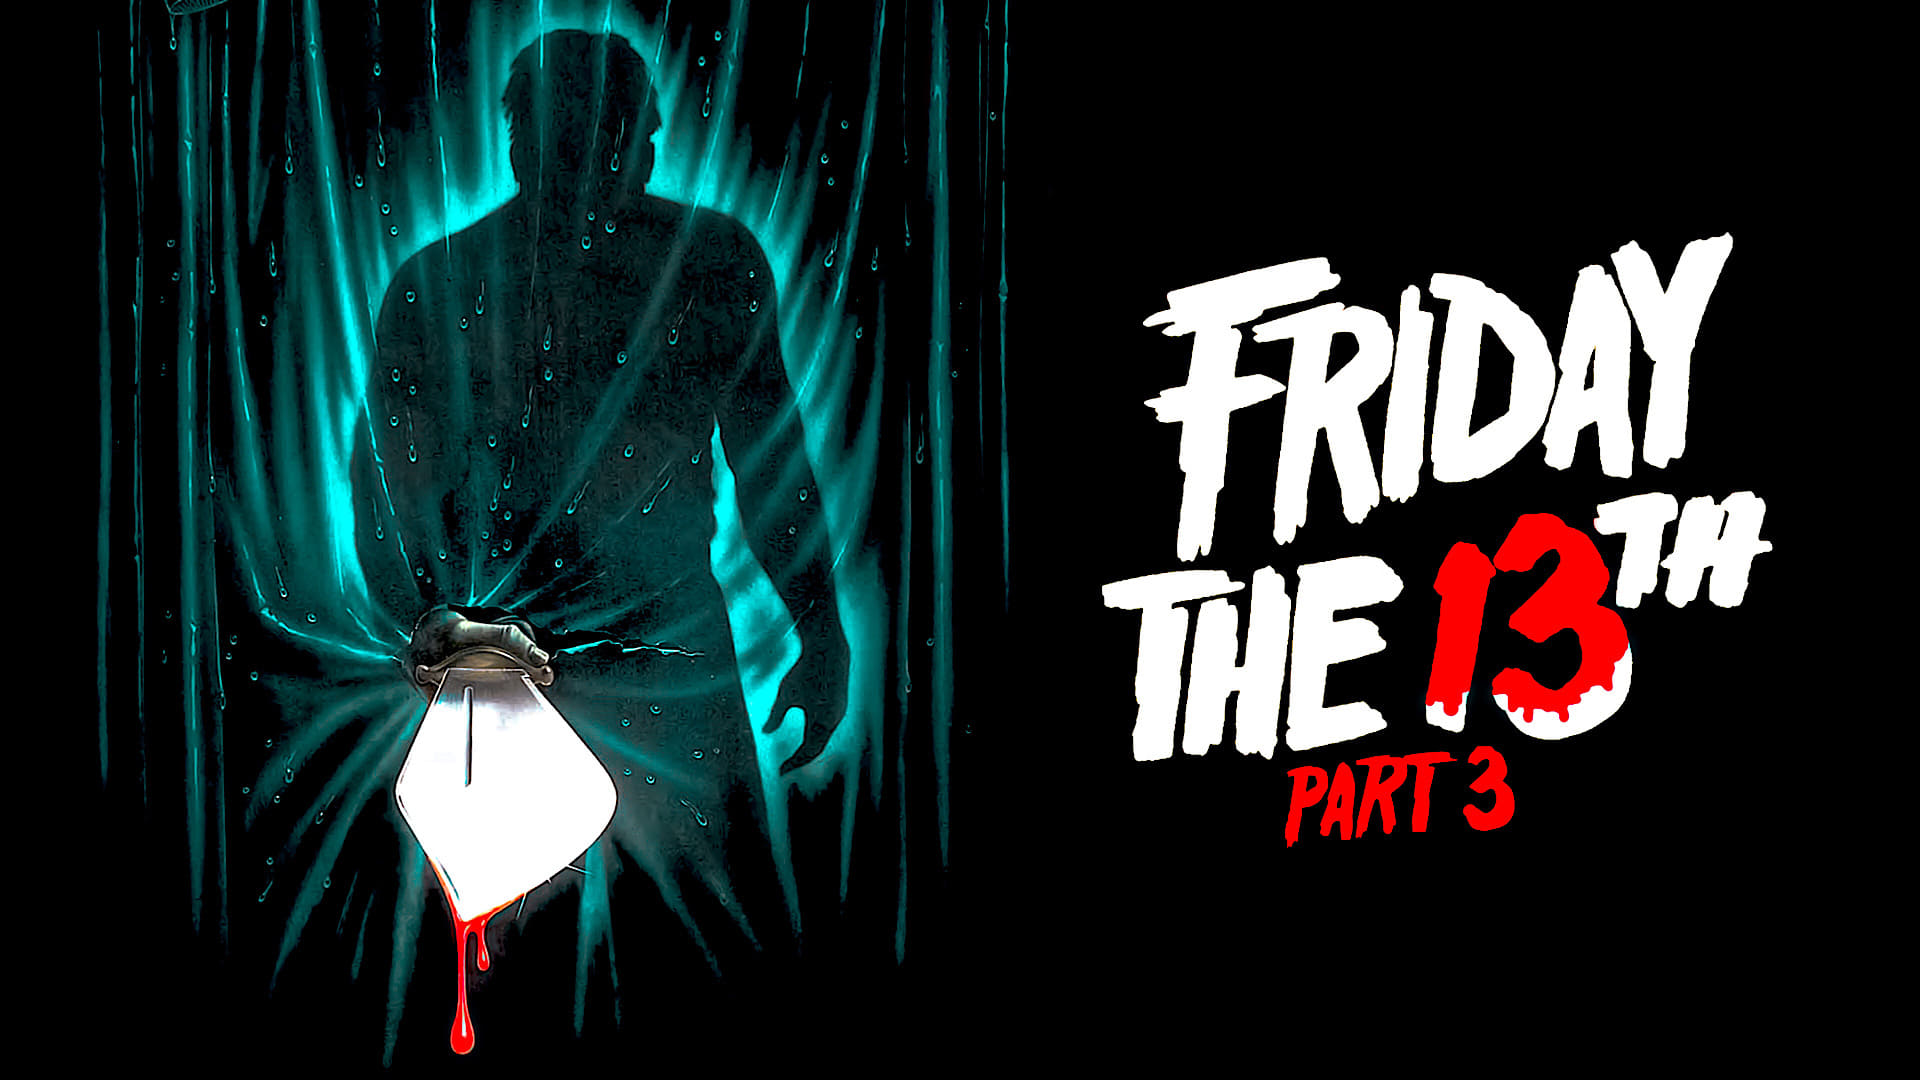 Friday the 13th Part III